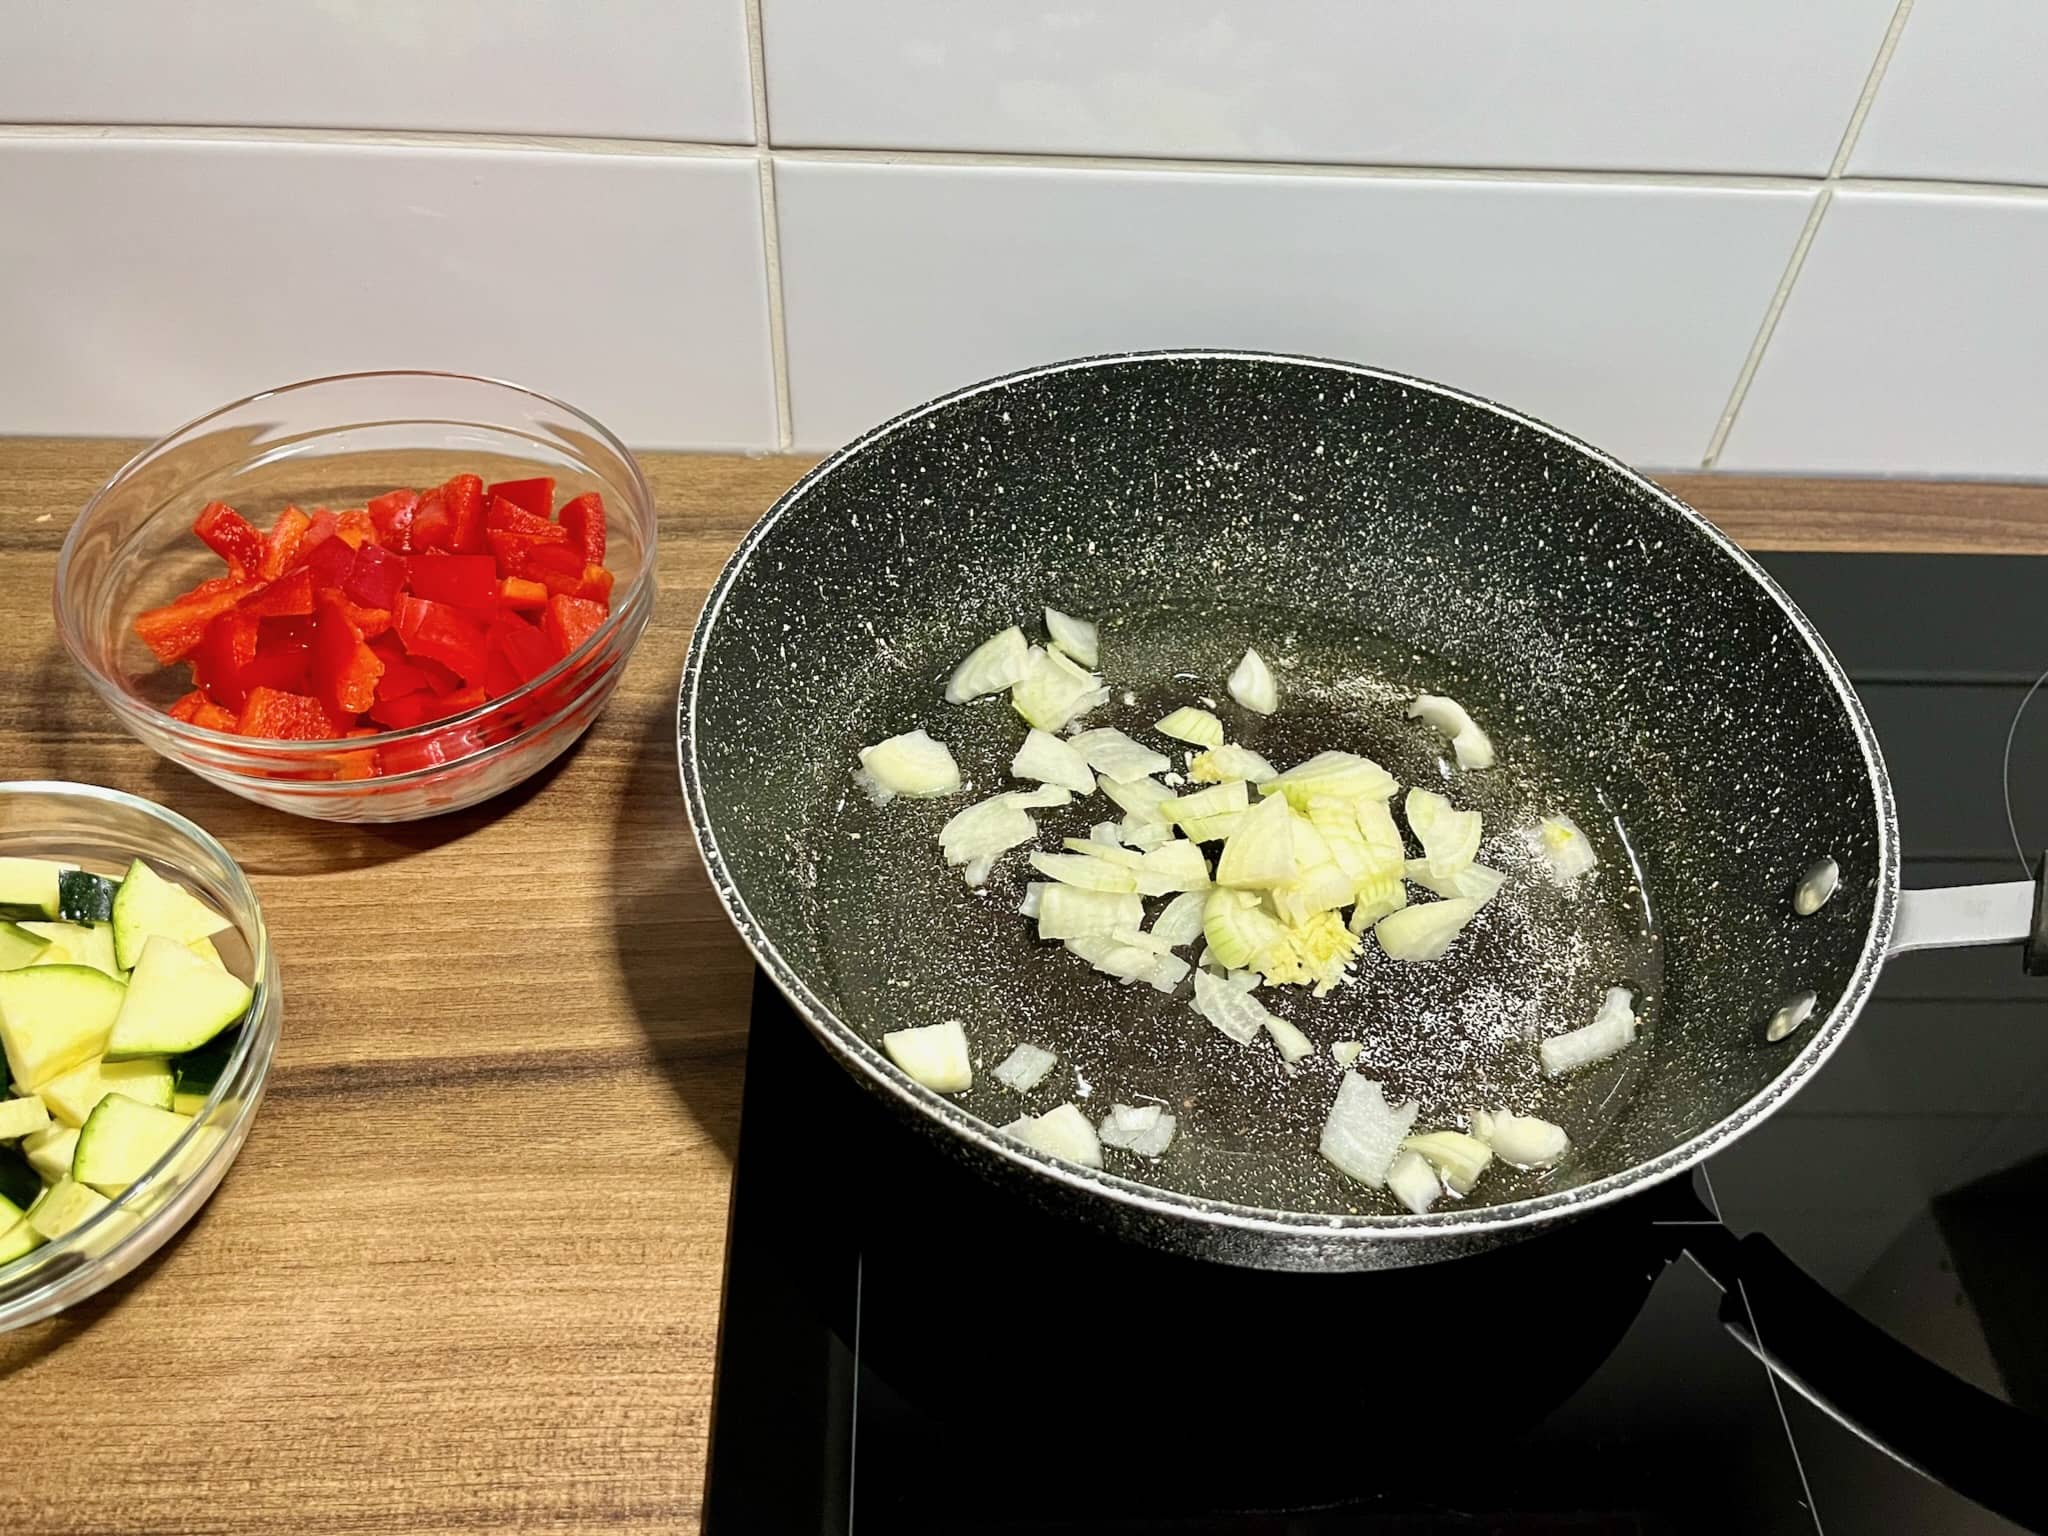 Onions and garlic frying in a pan